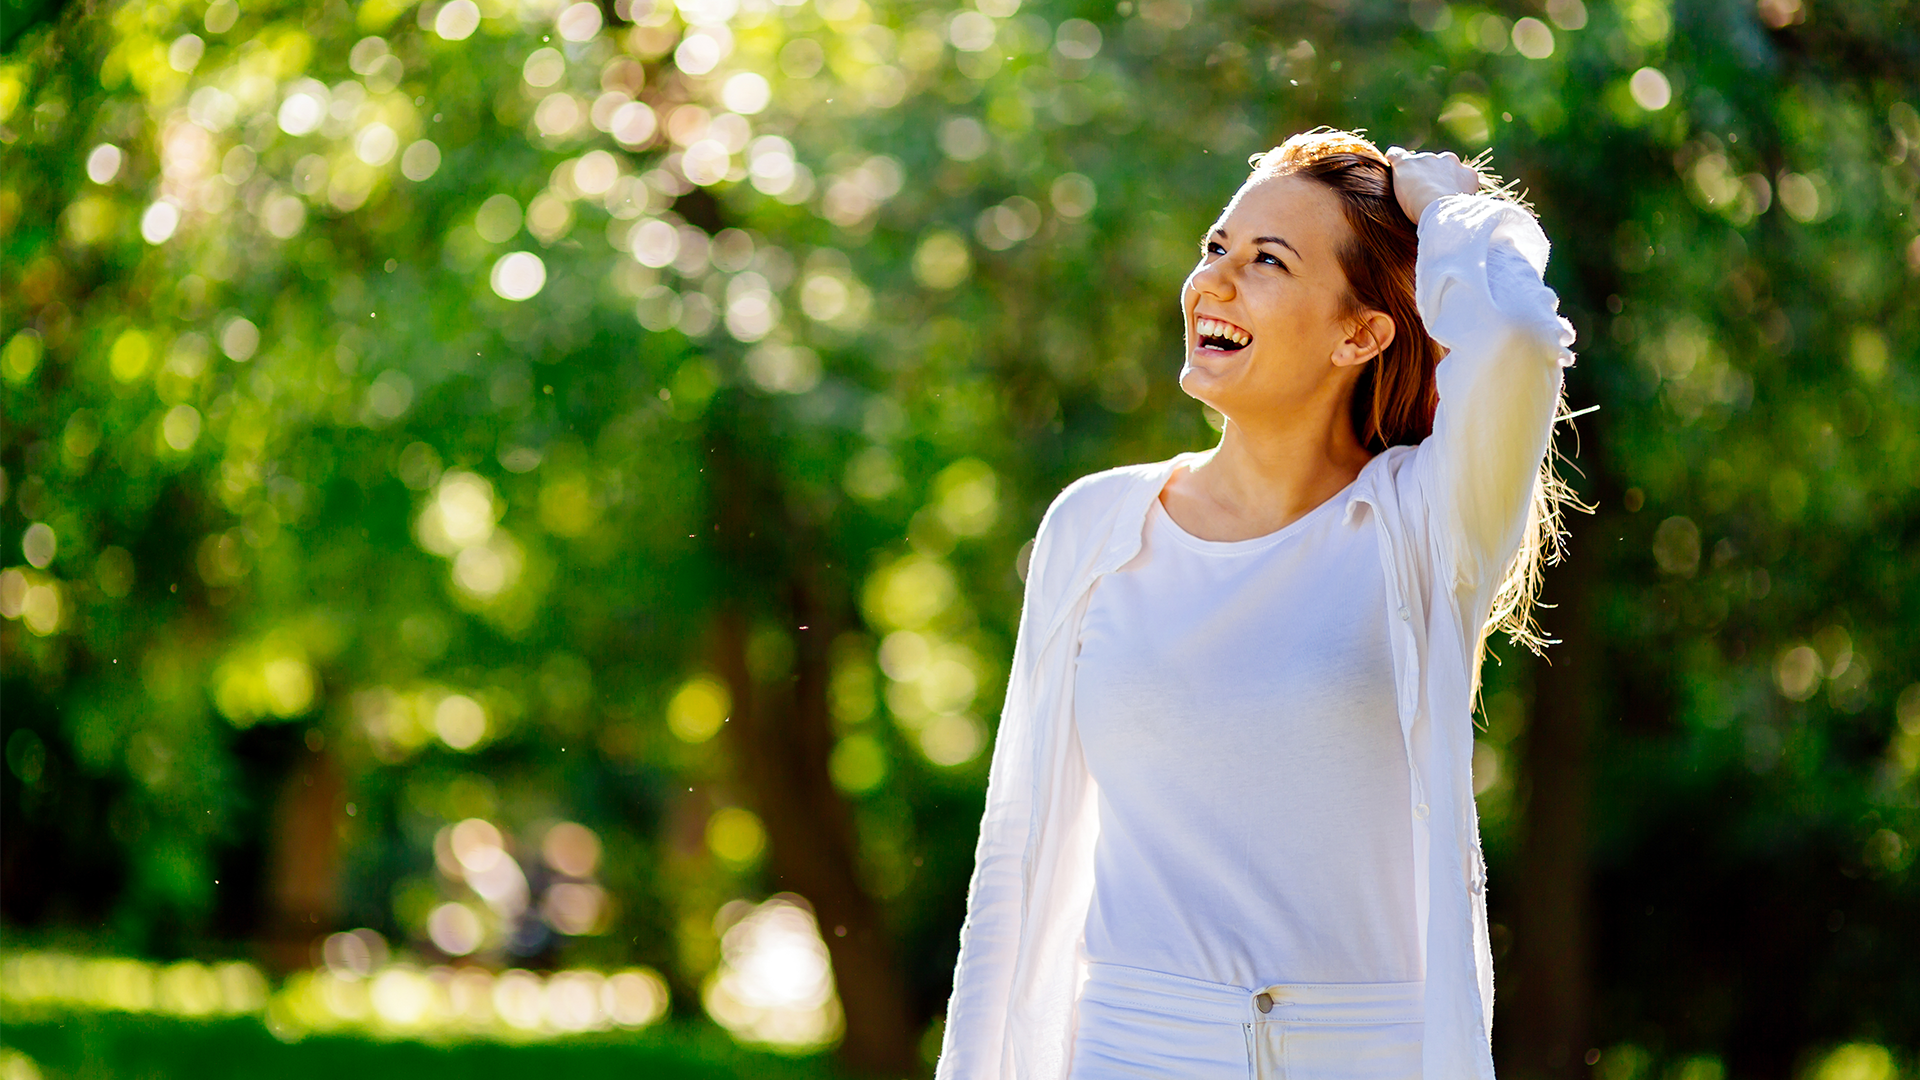 5 Ways to Increase Optimism and Reduce Anxiety Every Day